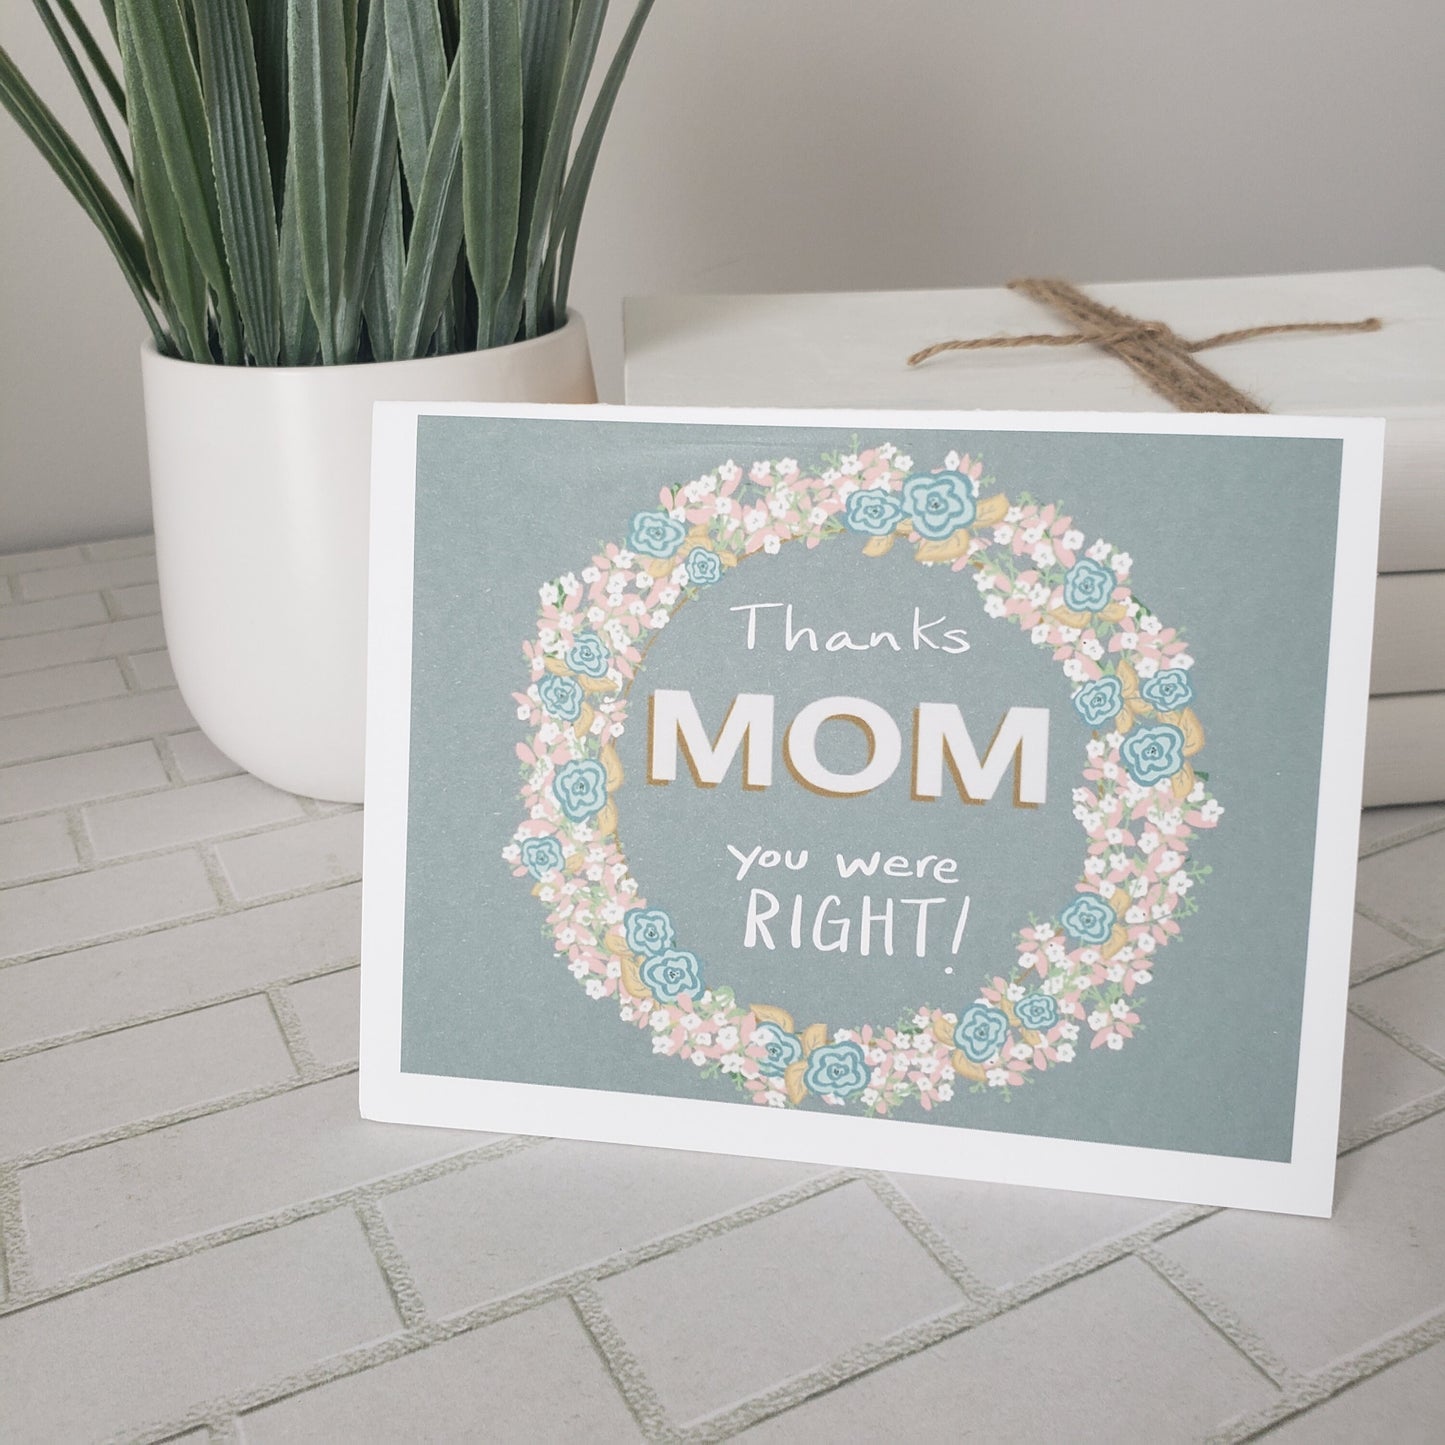 Mother’s Day Card - Thanks Mom You Were Right - Hand Drawn Floral Wreath- Greeting Card In Pink Teal And Grey Colors